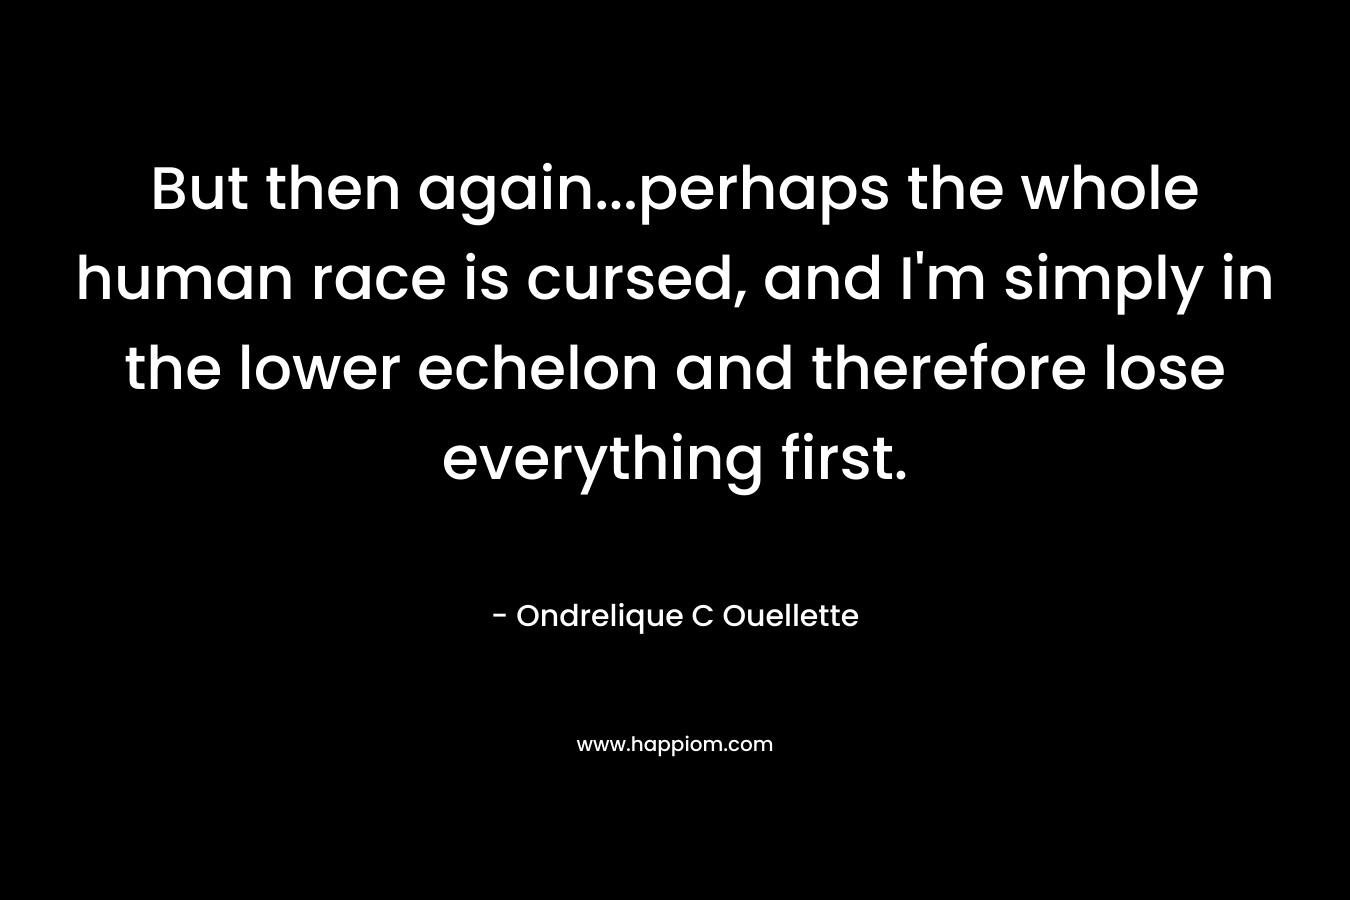 But then again…perhaps the whole human race is cursed, and I’m simply in the lower echelon and therefore lose everything first. – Ondrelique C Ouellette